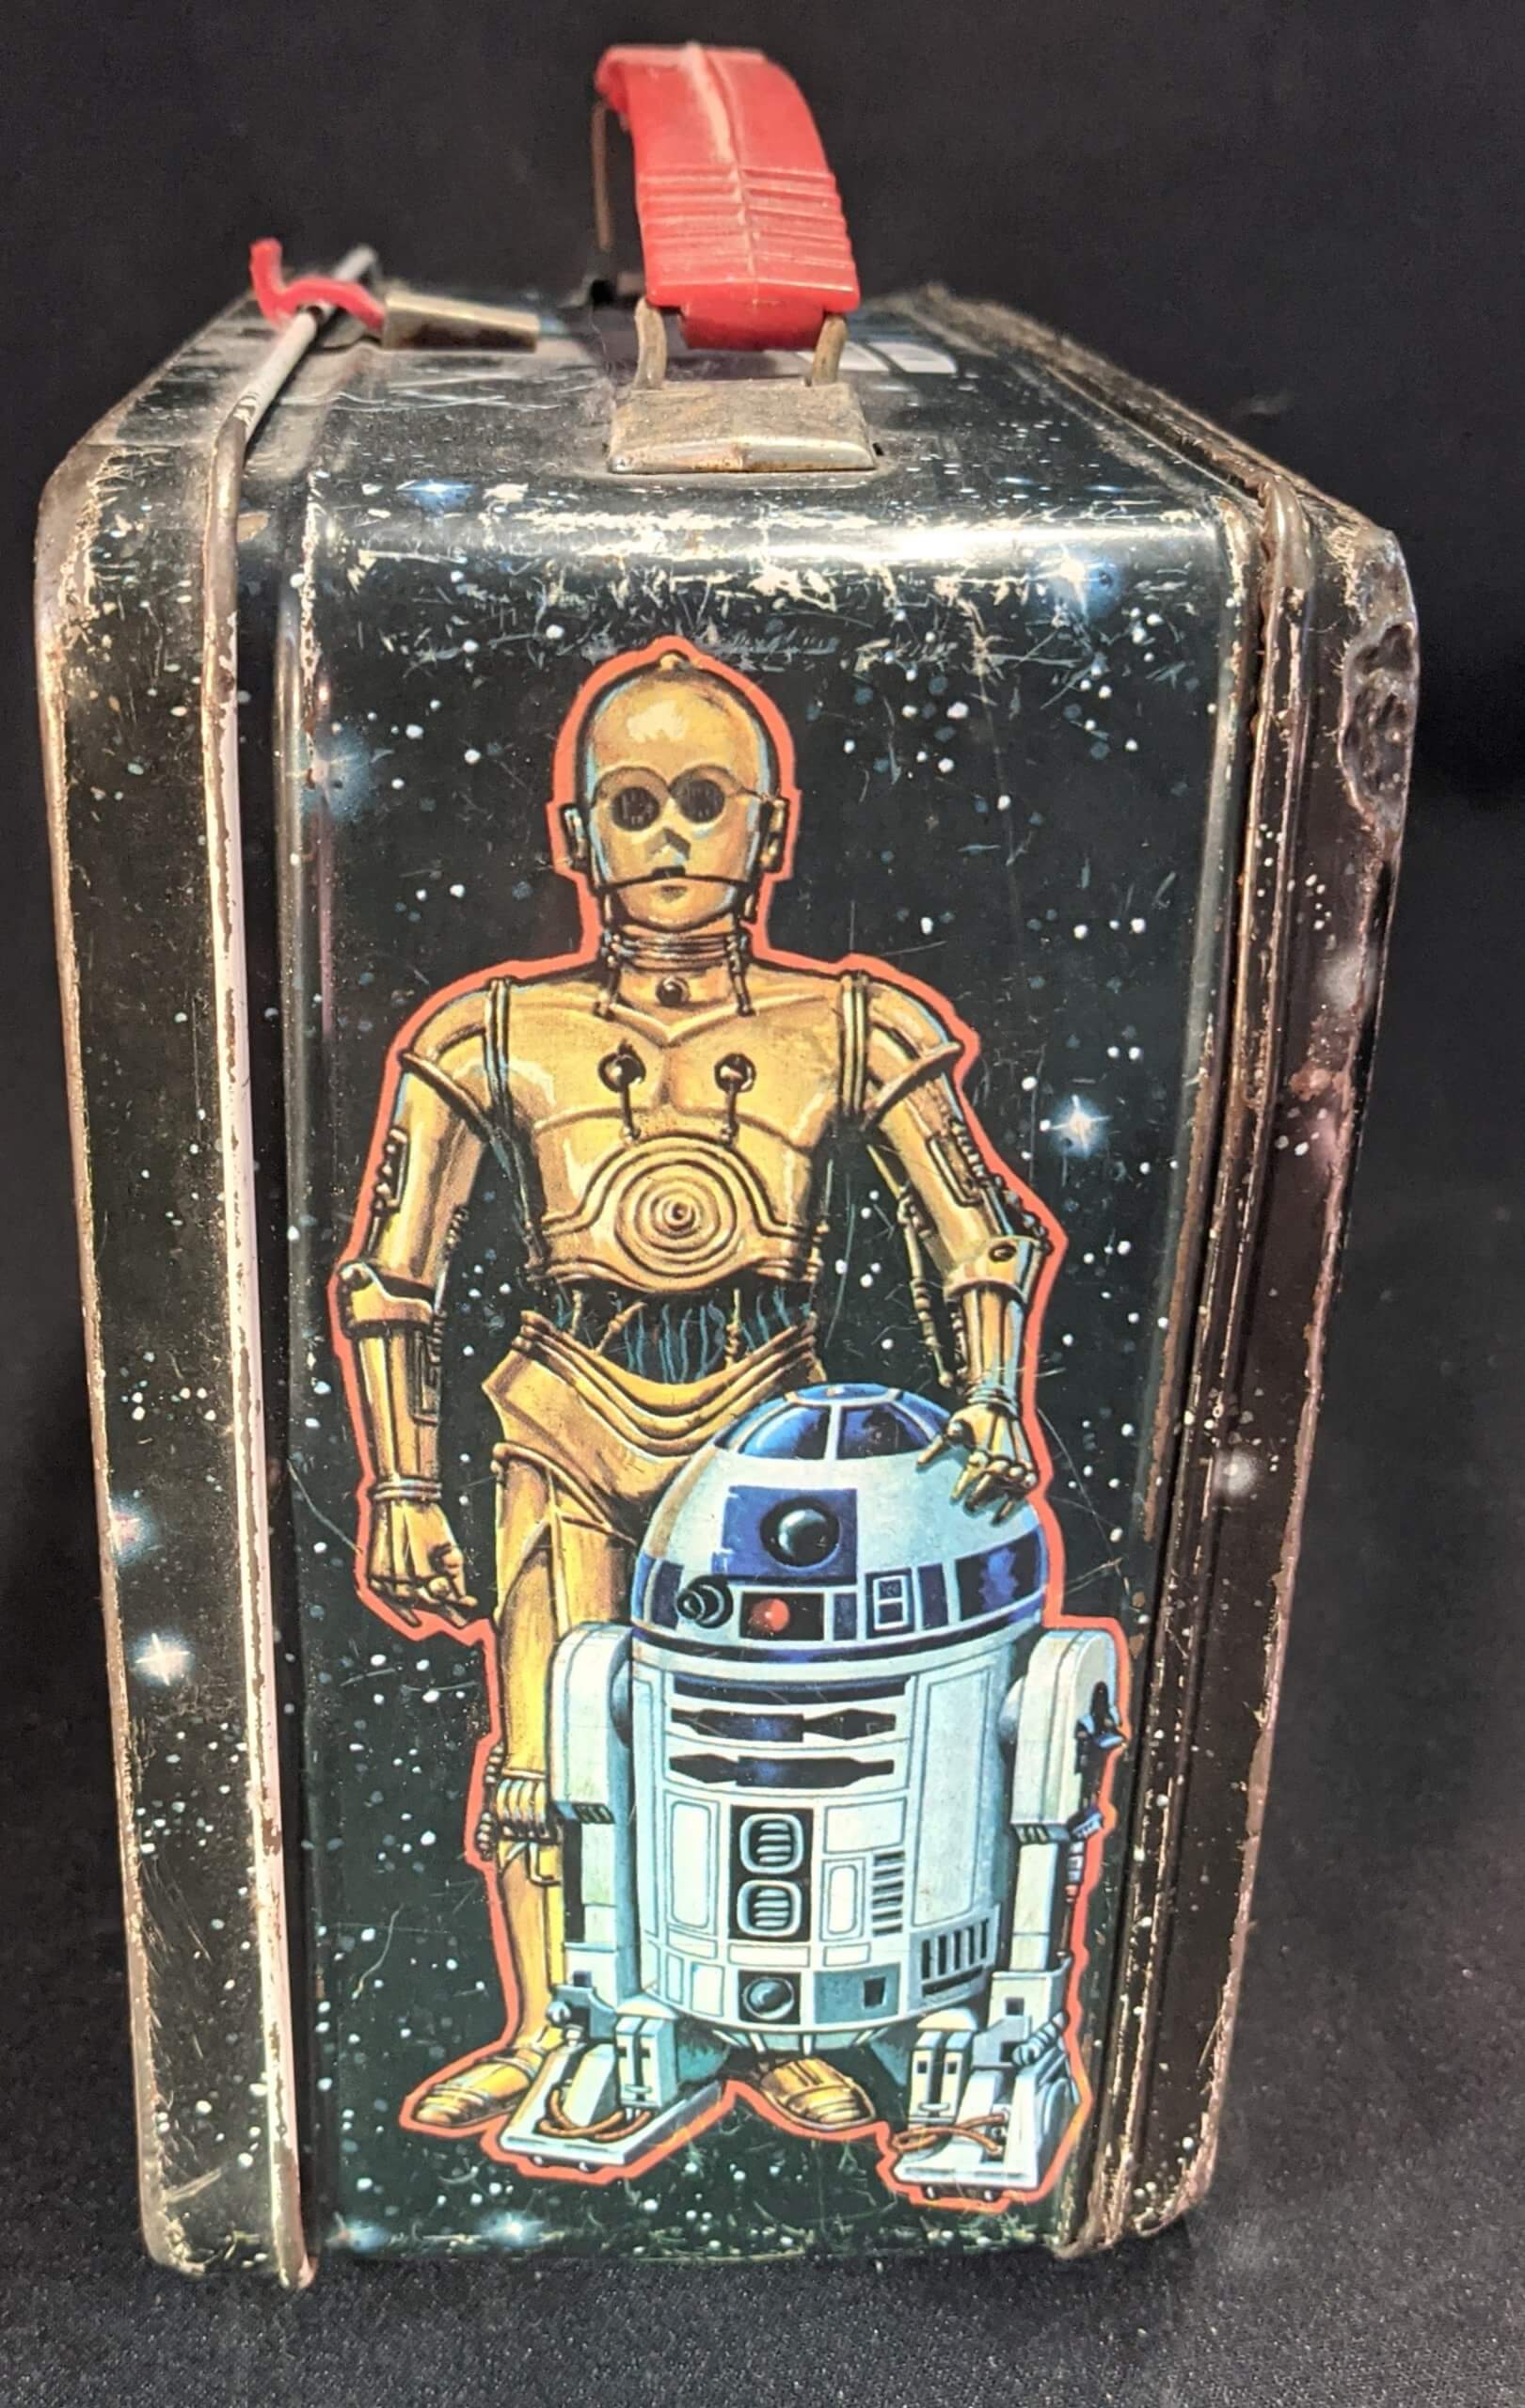 Original Star Wars Lunch Box and Thermos 1977 by King Seeley for Sale in  Glendale, CA - OfferUp